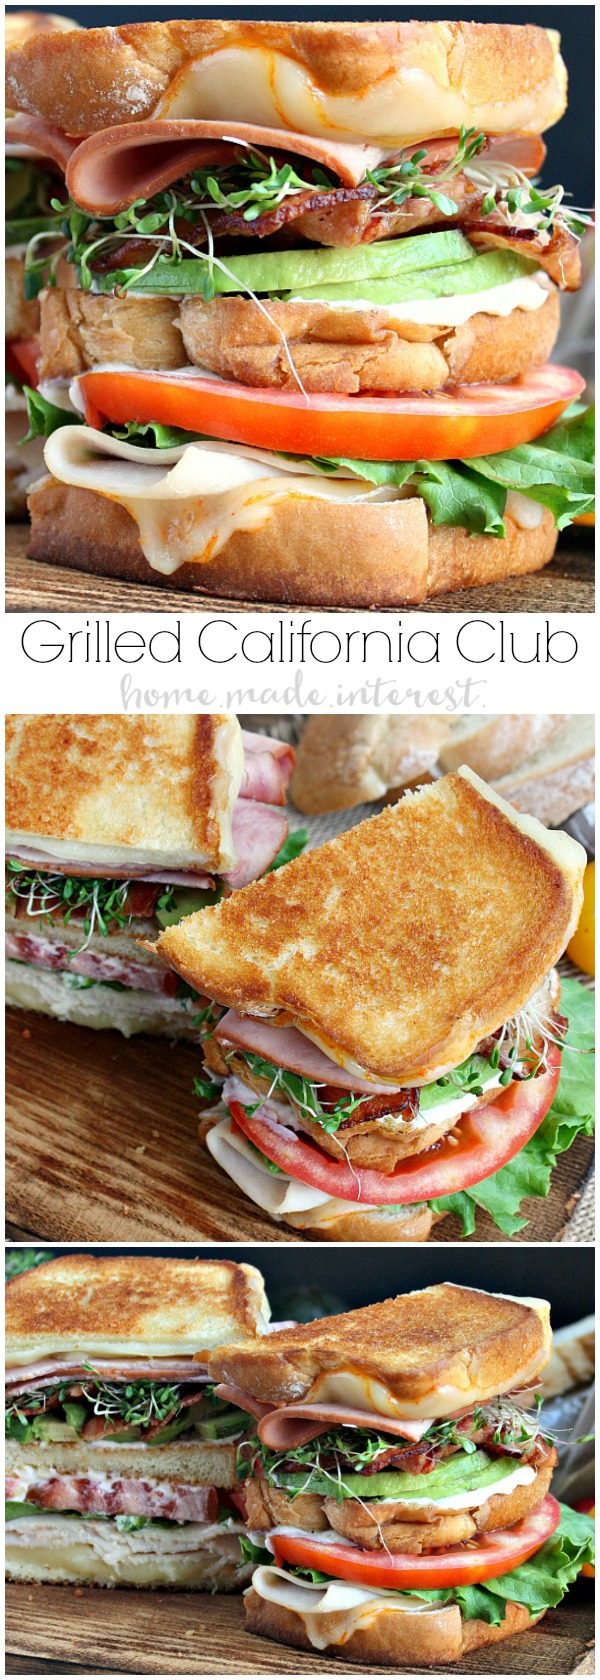 An amazing grilled cheese recipe for National Grilled Cheese Month! We’ve taken a California Club sandwich and turned it into a triple decker grilled cheese sandwich. This grilled california club sandwich oozes Munster cheese, and is piled high with ham, turkey, bacon, avocado, lettuce, tomatoes, and sprouts. 